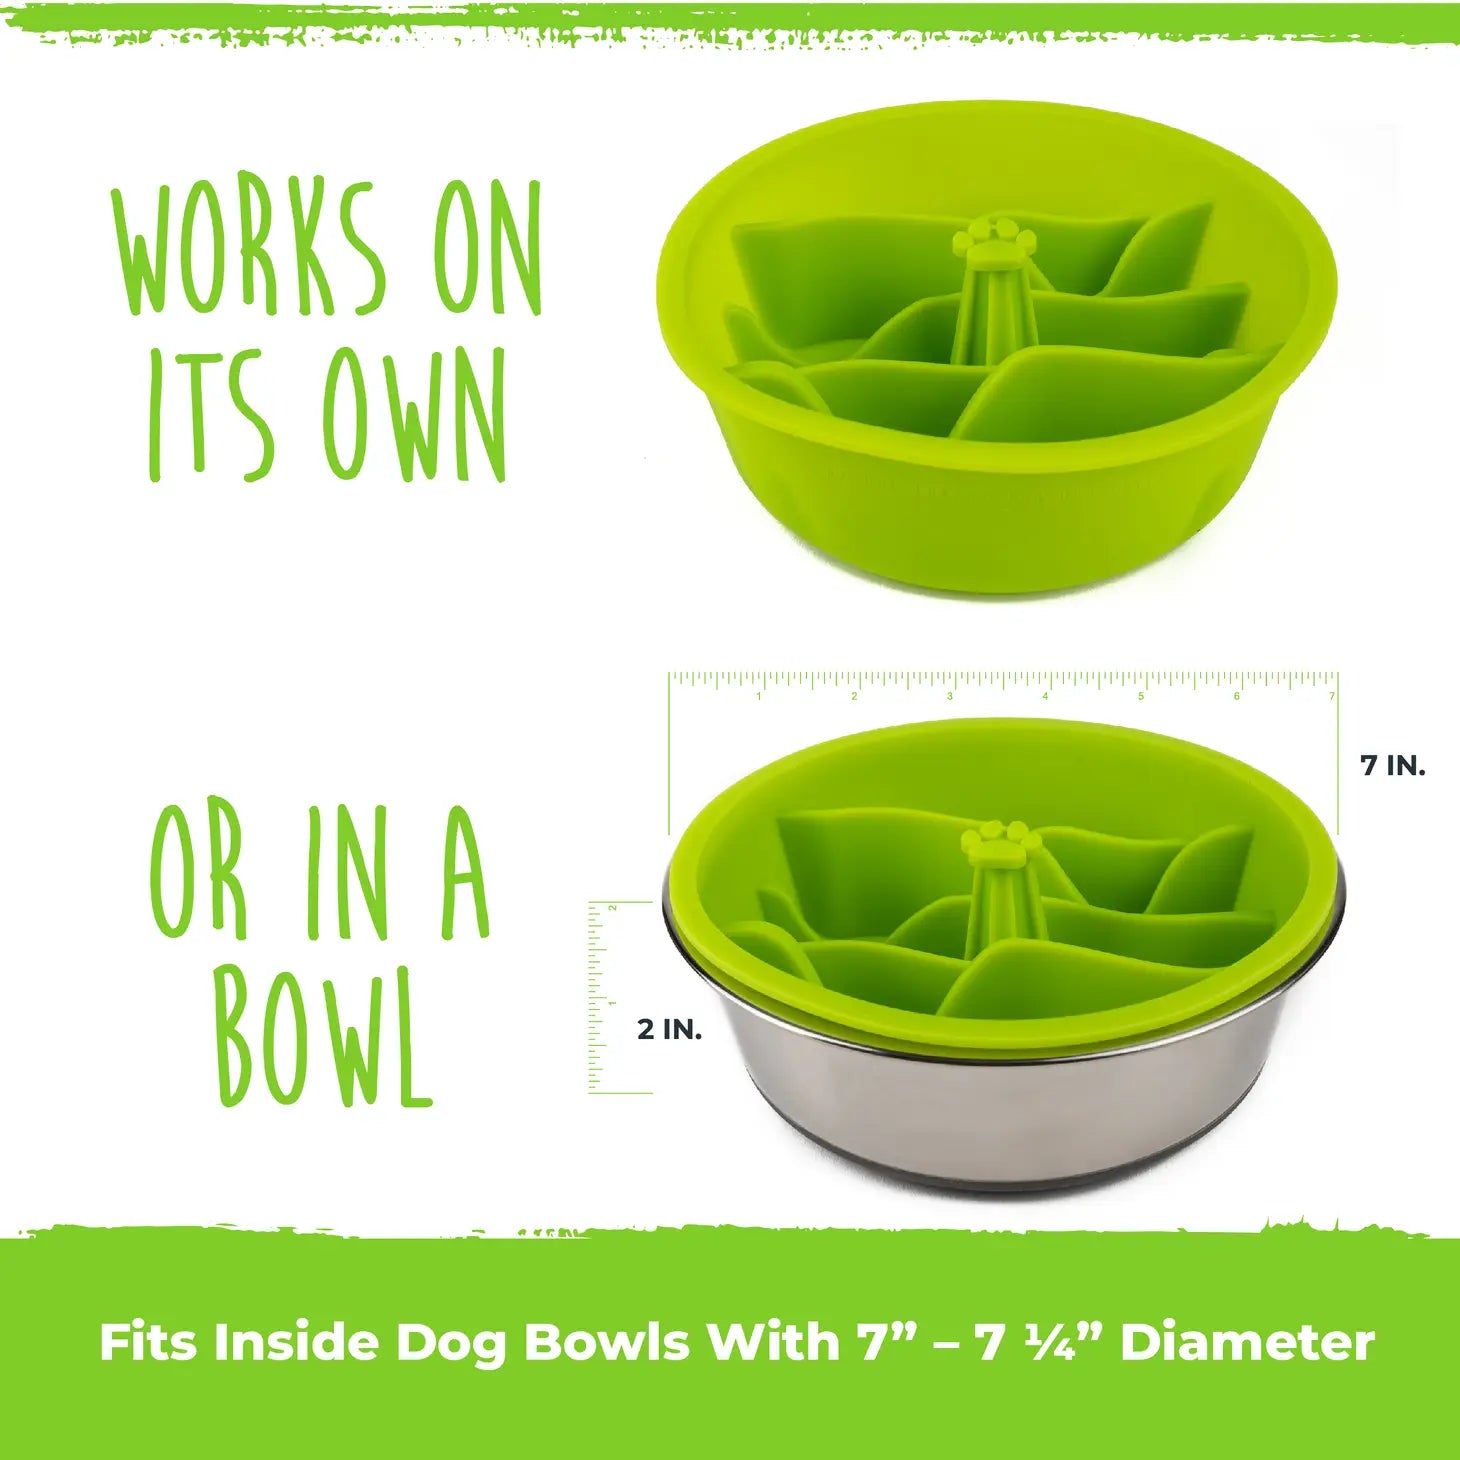 Silicone Slow Feed Bowl Insert works on its own or in a bowl